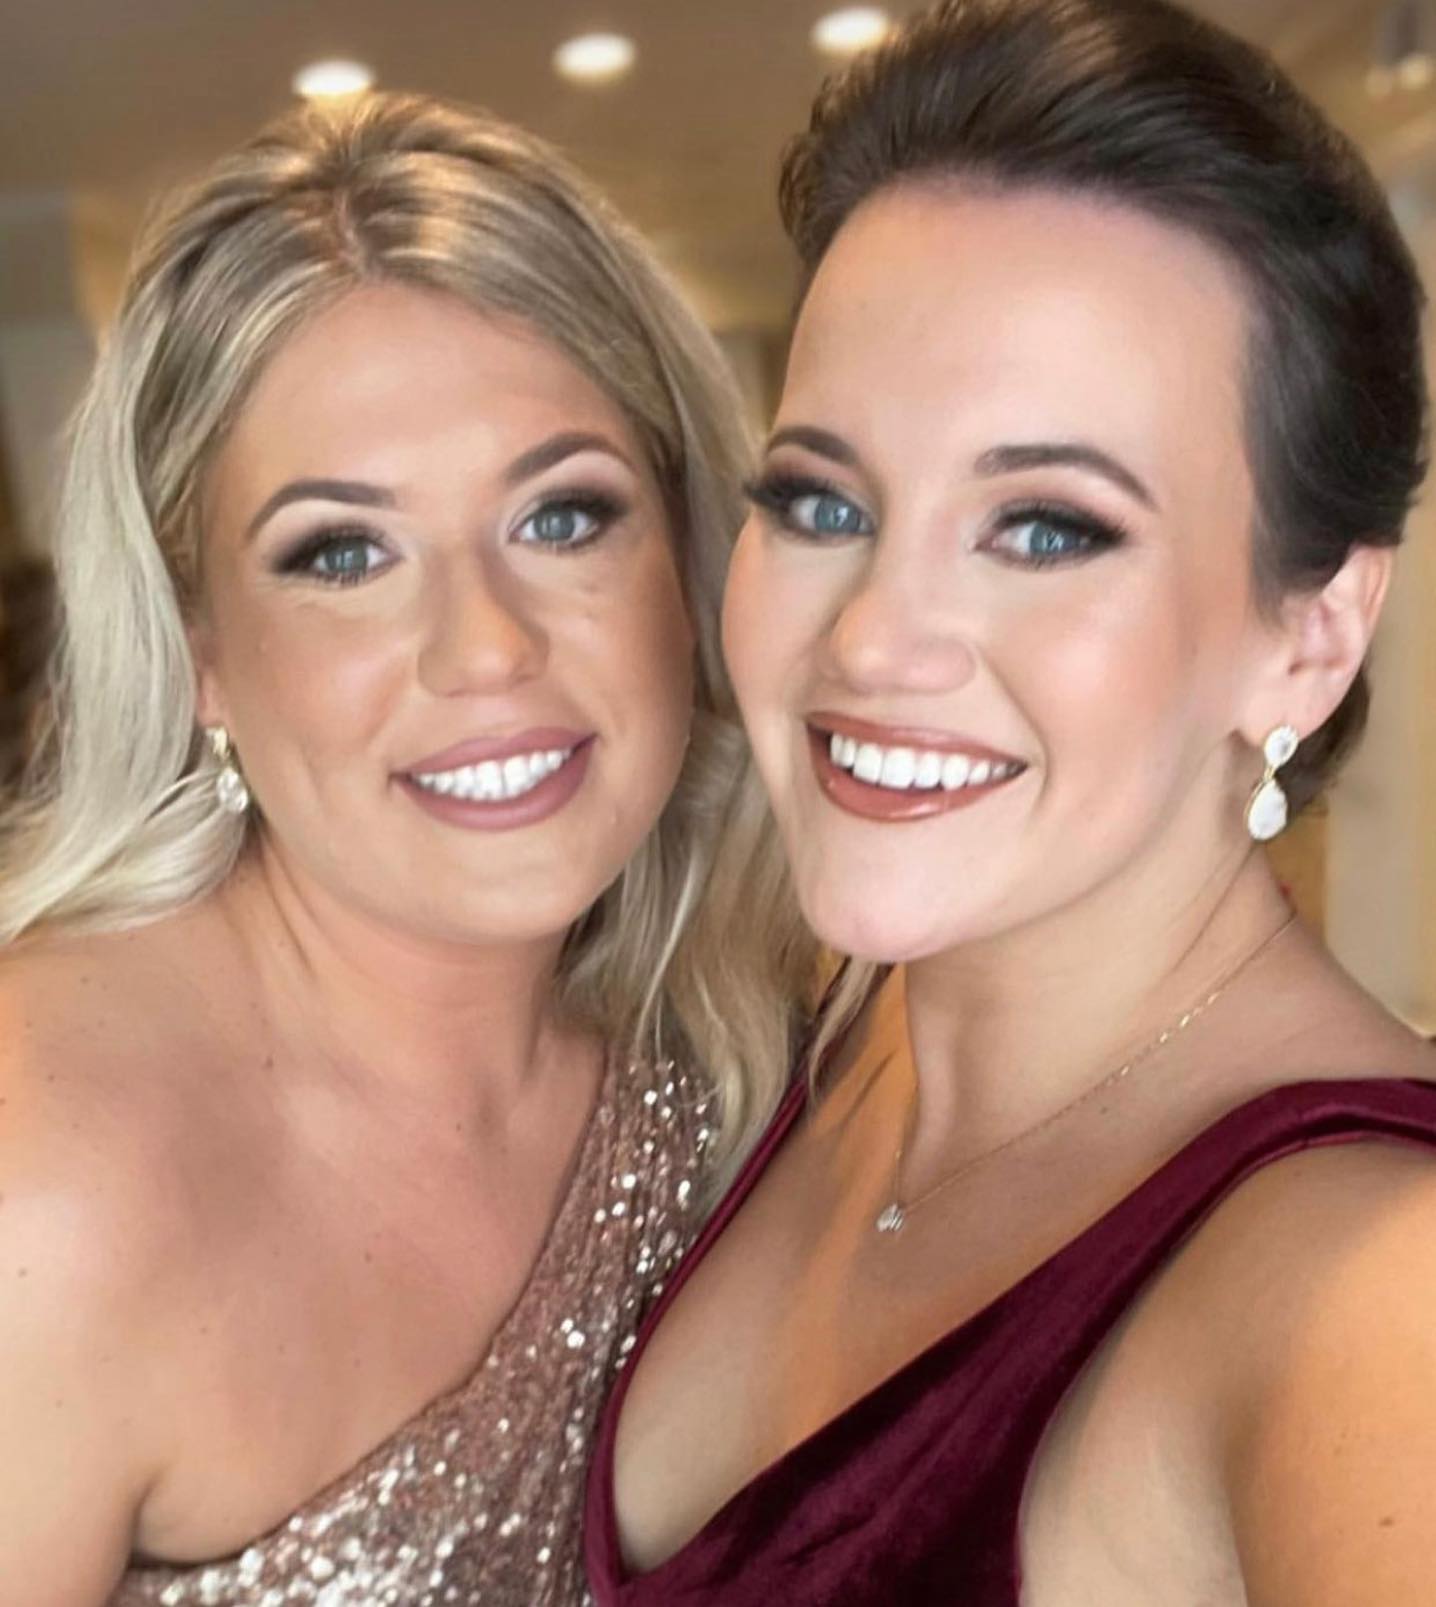 Makeup by Kasey on these 2 gorgeous bridesmaids 🤩🤩✨💄 

- for all makeup inquiries email kasey at 
bonkkasey@gmail.com 
- 
@kaseybonkartistry